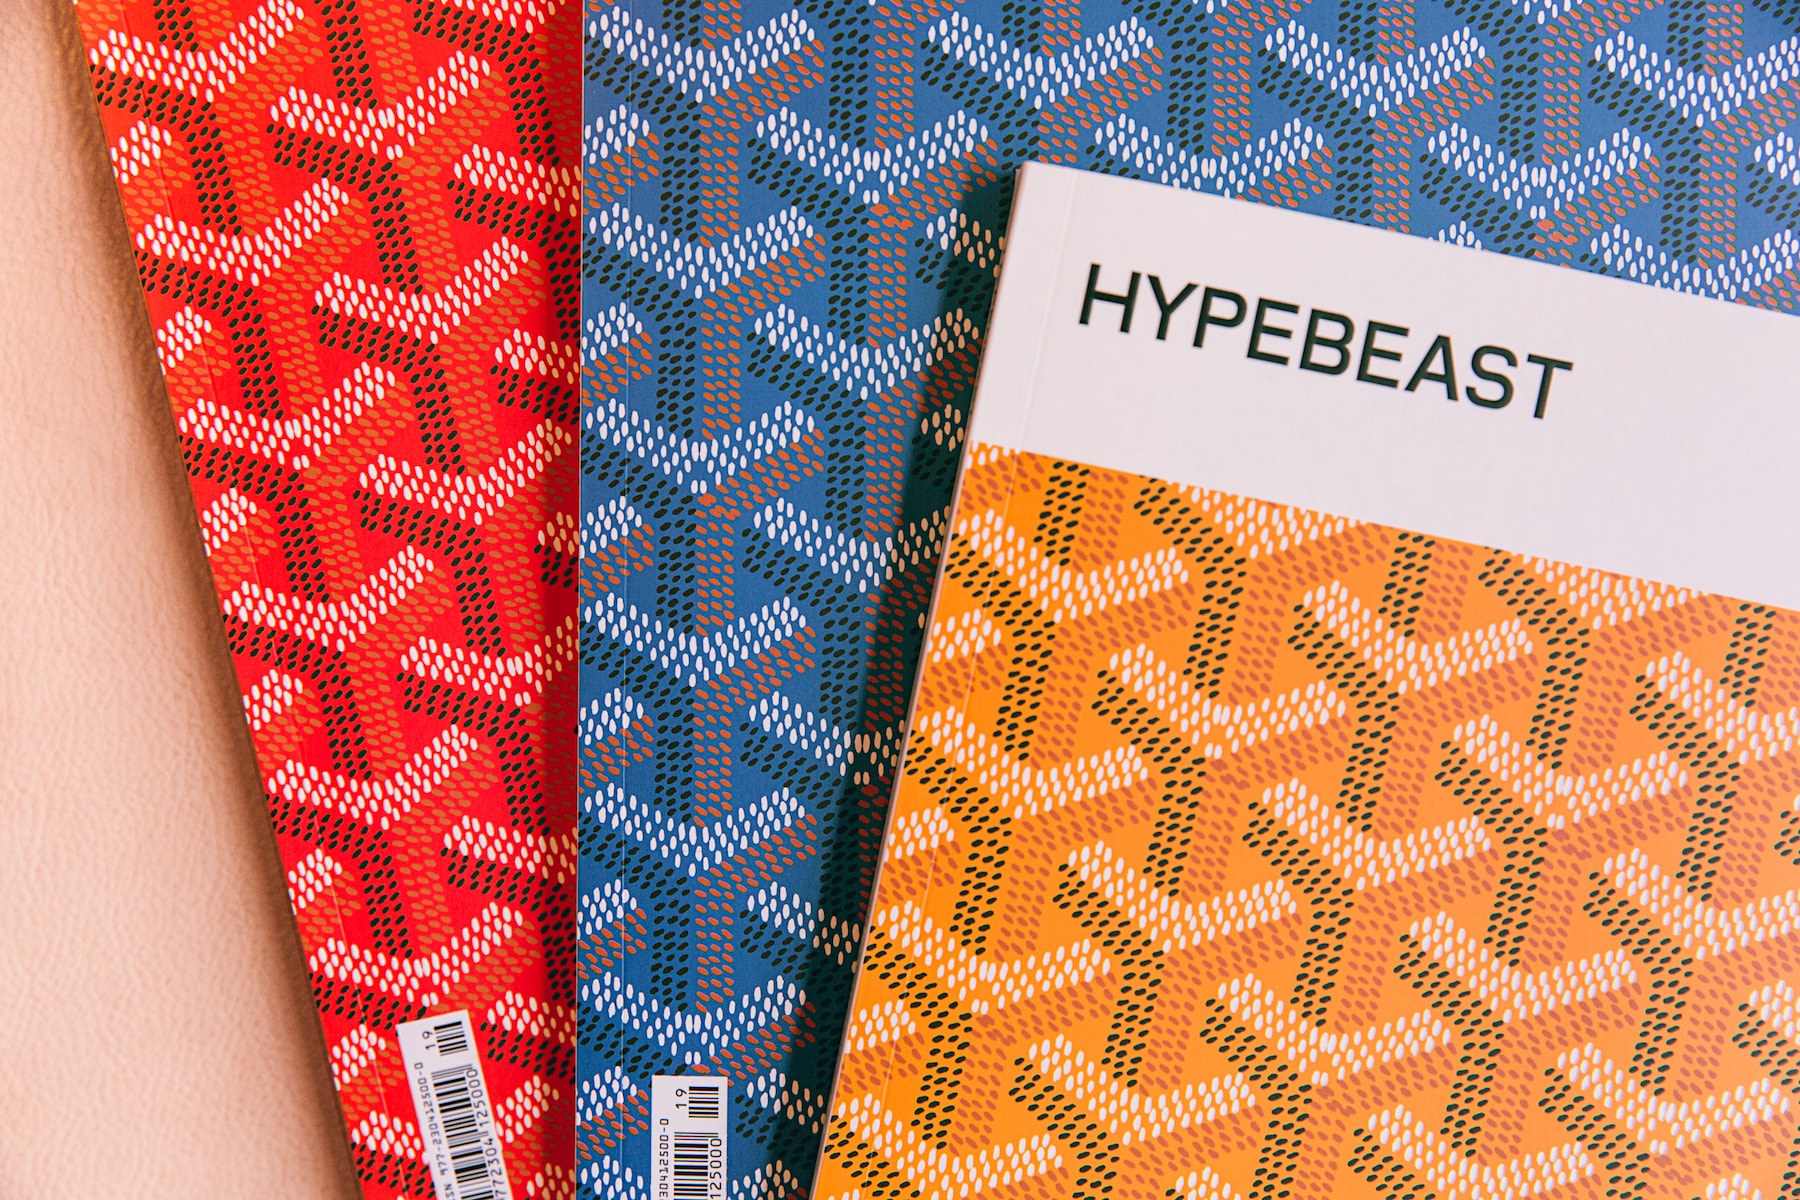 HYPEBEAST Magazine Issue 19: The Temporal Issue